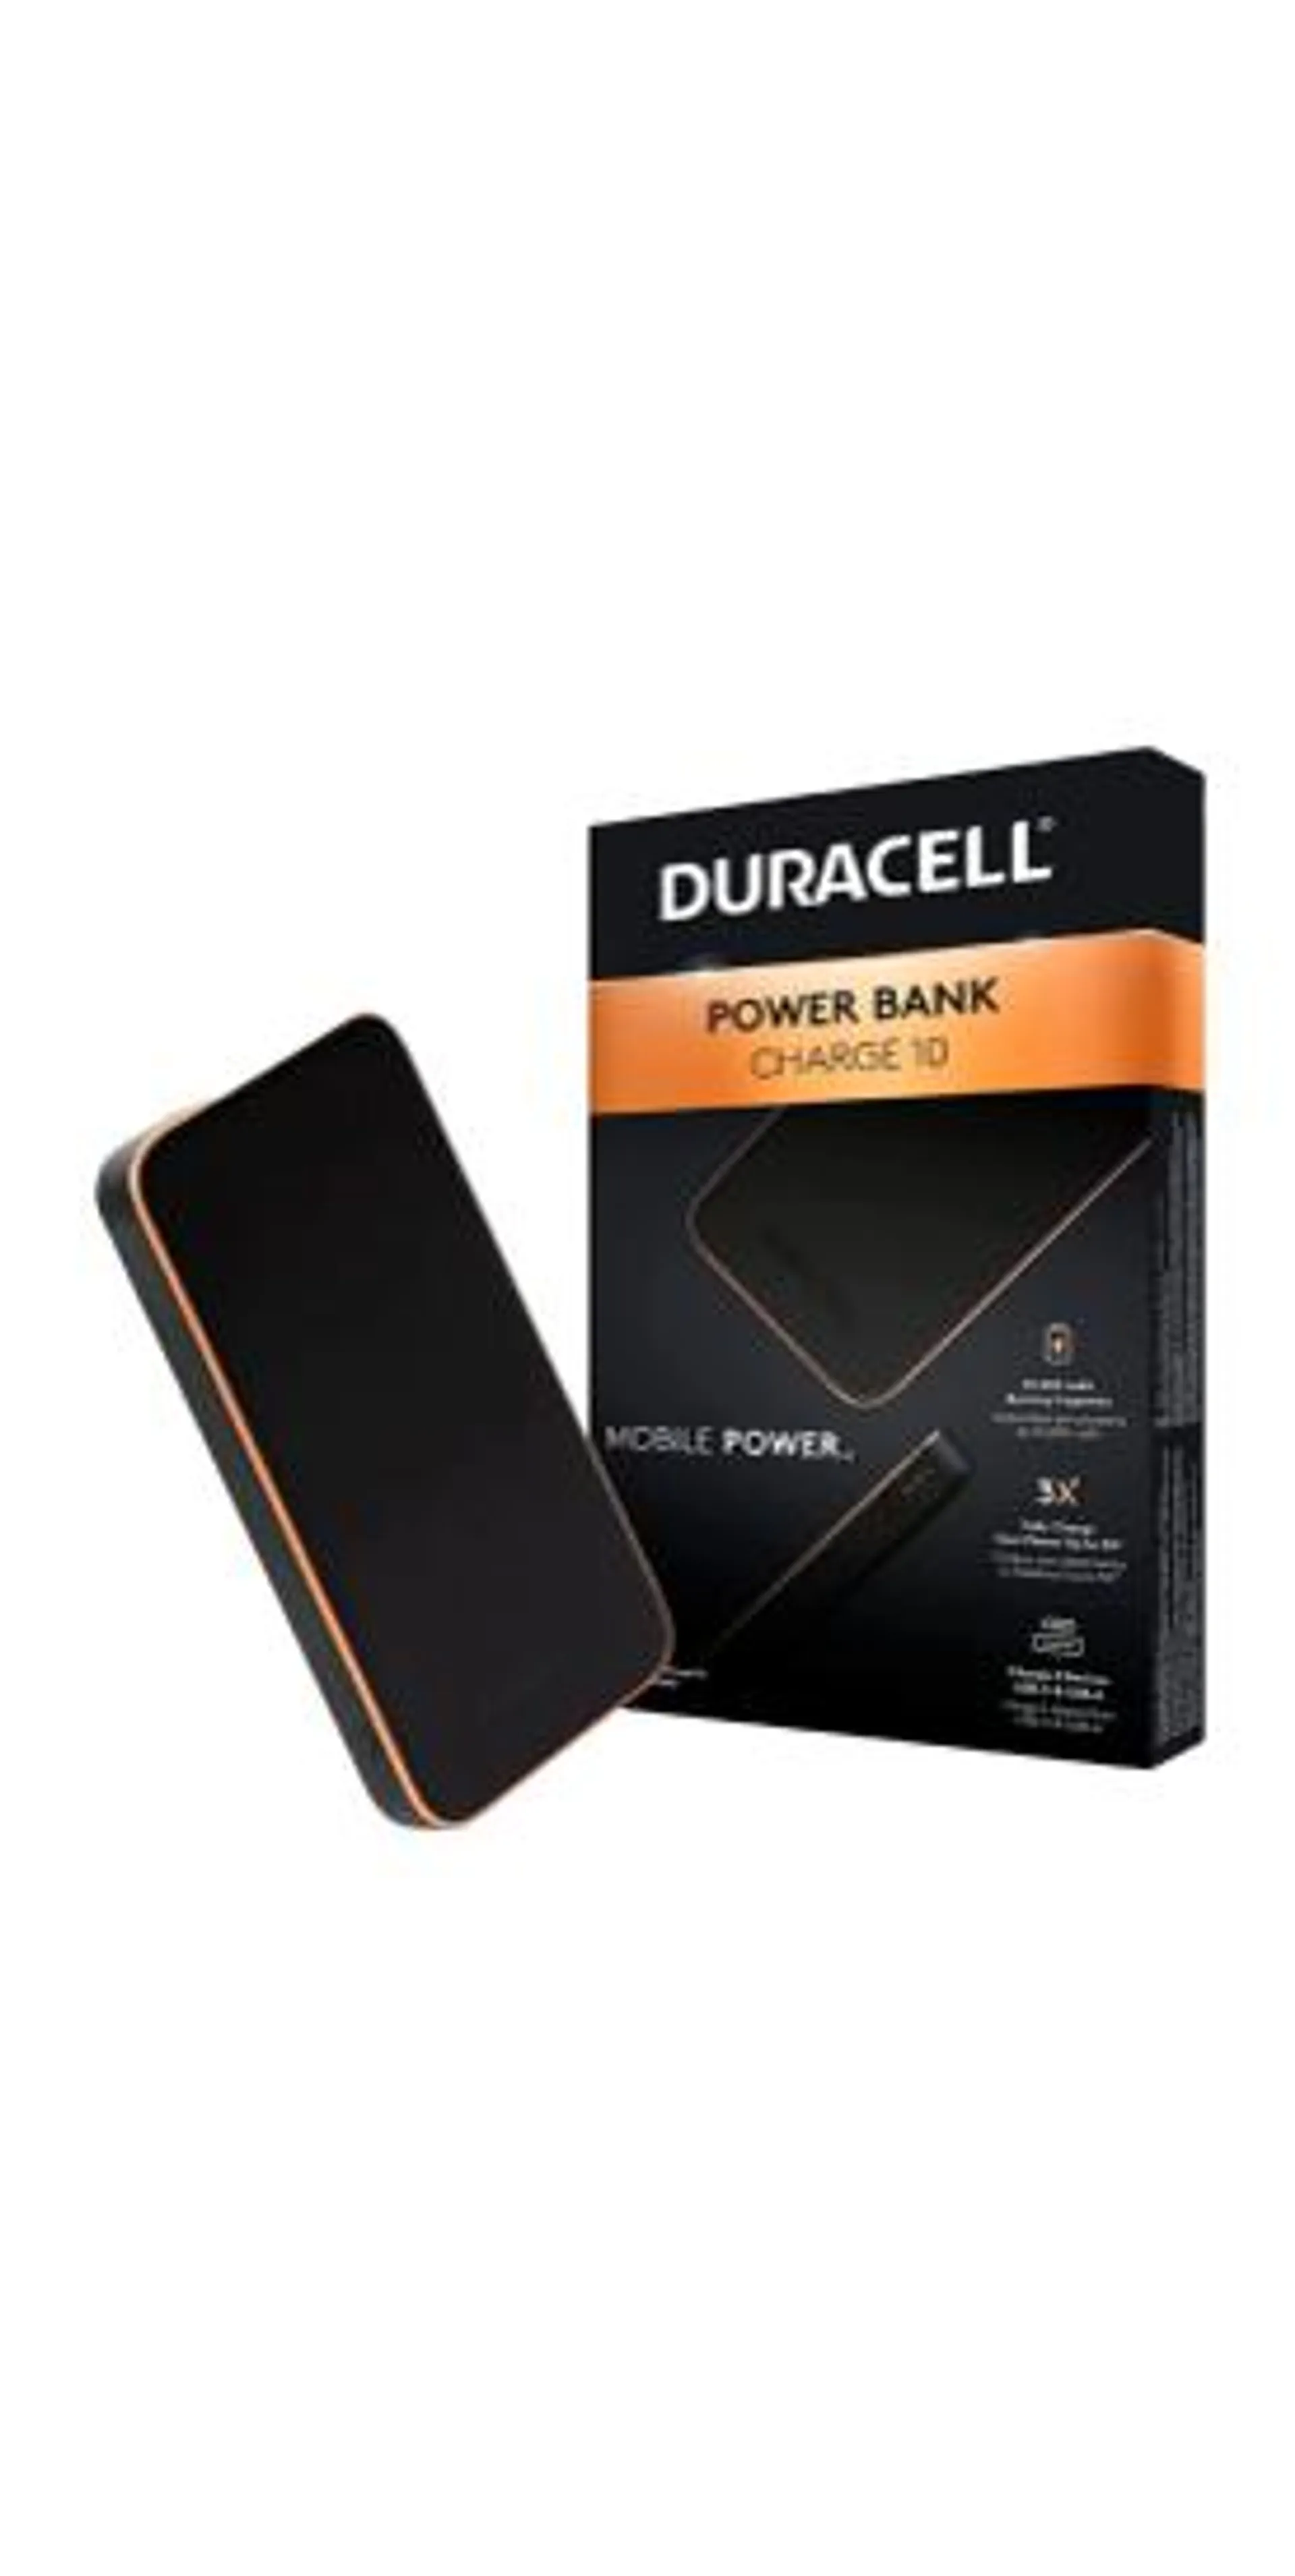 Duracell PowerBank Charge 10